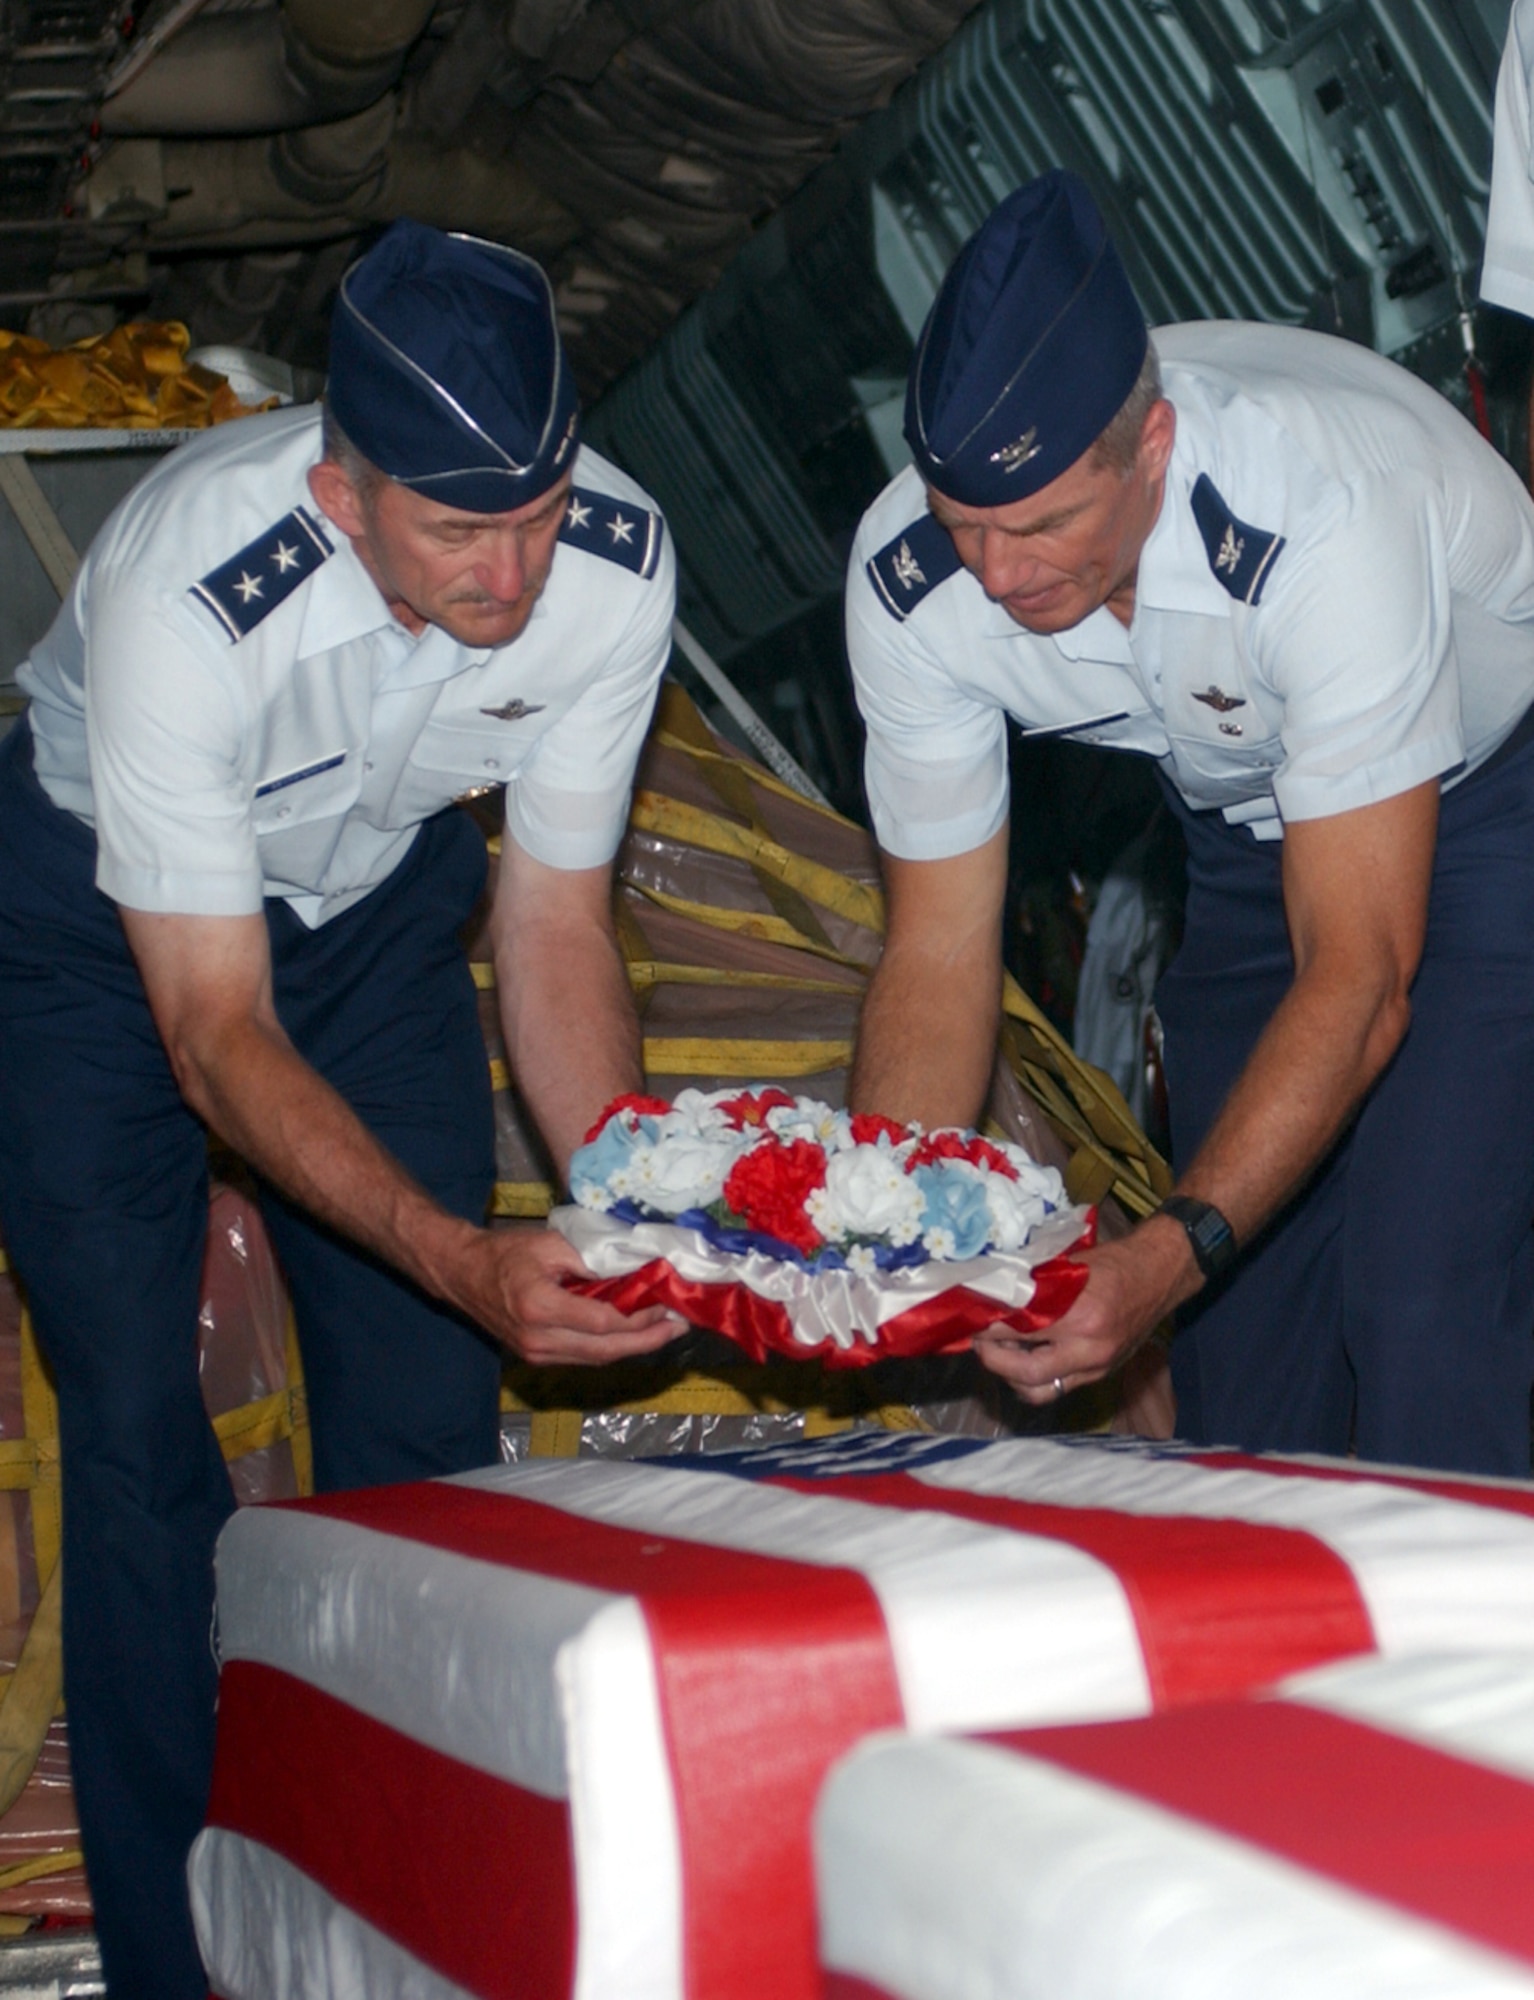 ANDERSEN AIR FORCE BASE, Guam -- Maj. Gen. Edward Mechenbier (left) and Col. Gregg Sanders lay a wreath on one of two transfer cases containing the remains of servicemembers from the Vietnam War during a repatriation ceremony here May 29.  General Mechenbier is the last Airman still serving who was a prisoner of war during Vietnam.  He flew the Hanoi Taxi on this mission to bring his fallen comrades home.  The Hanoi Taxi became the first C-141 Startlifter to repatriate American POWs from Vietnam on Feb. 12, 1973.  Colonel Sanders is the 13th Air Force vice commander.  (U.S. Air Force photo by Staff Sgt. Rasheen Douglas)